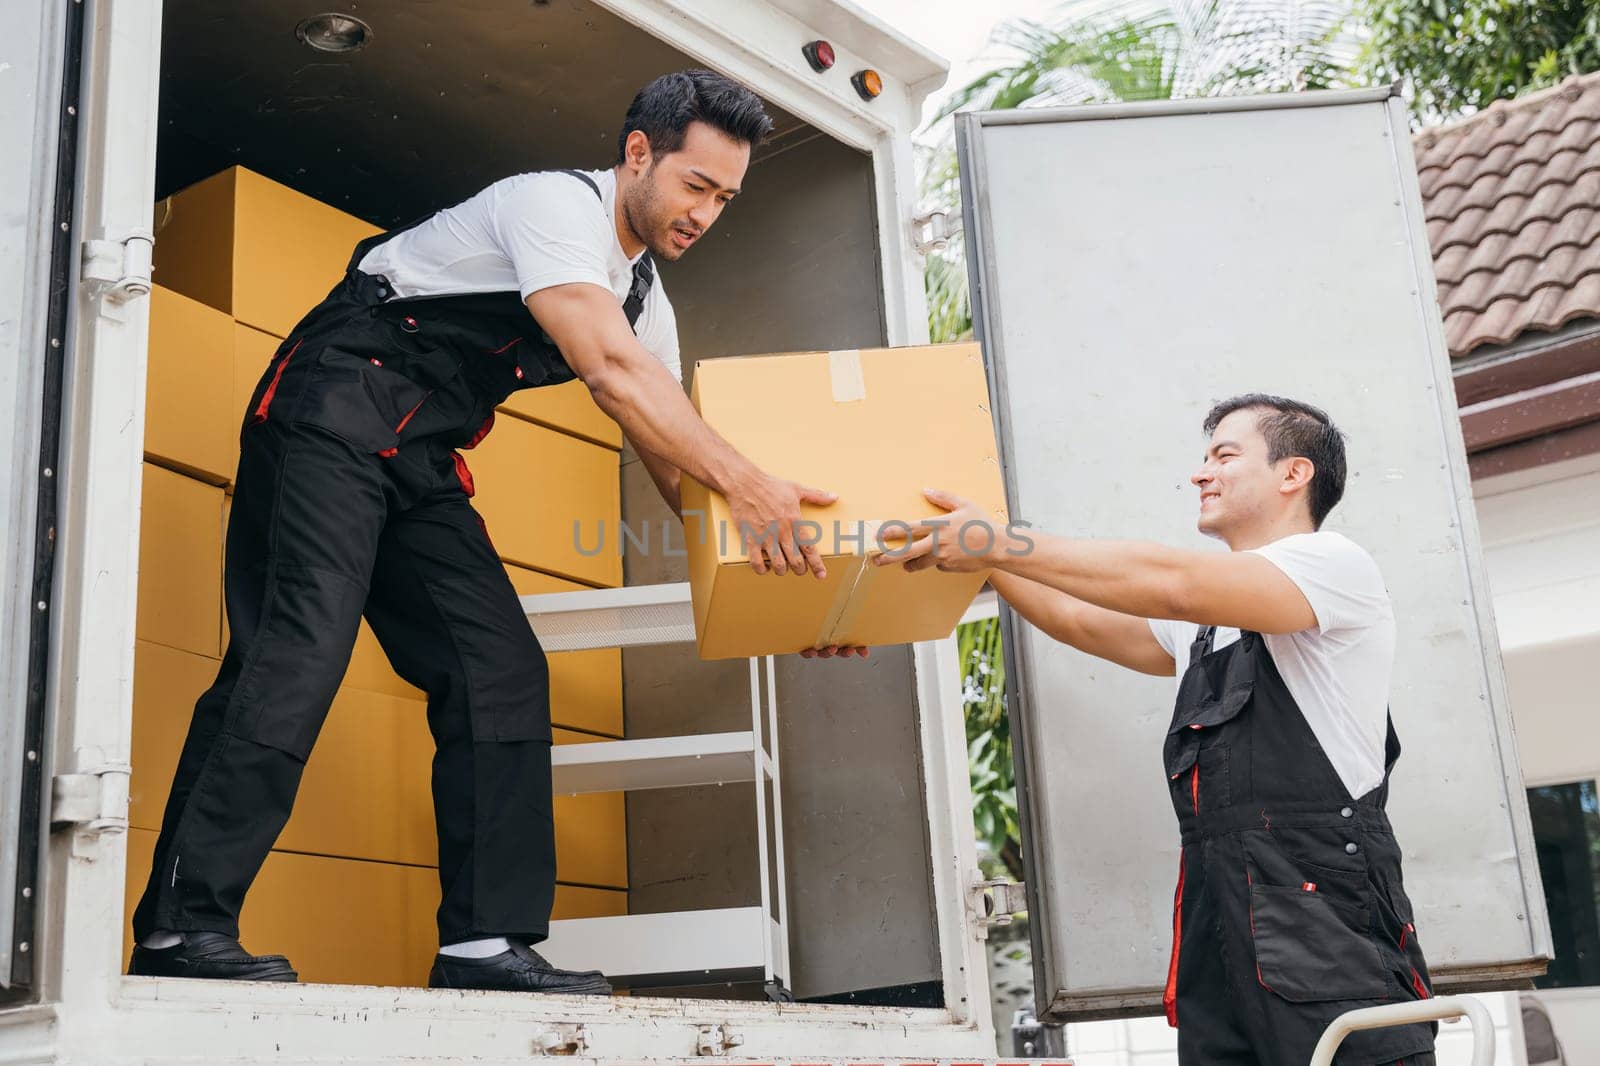 Smiling employees of a removal company work in uniform unloading boxes and furniture from the truck. Their dedication guarantees a smooth delivery into the new home ensuring happiness. Moving Day